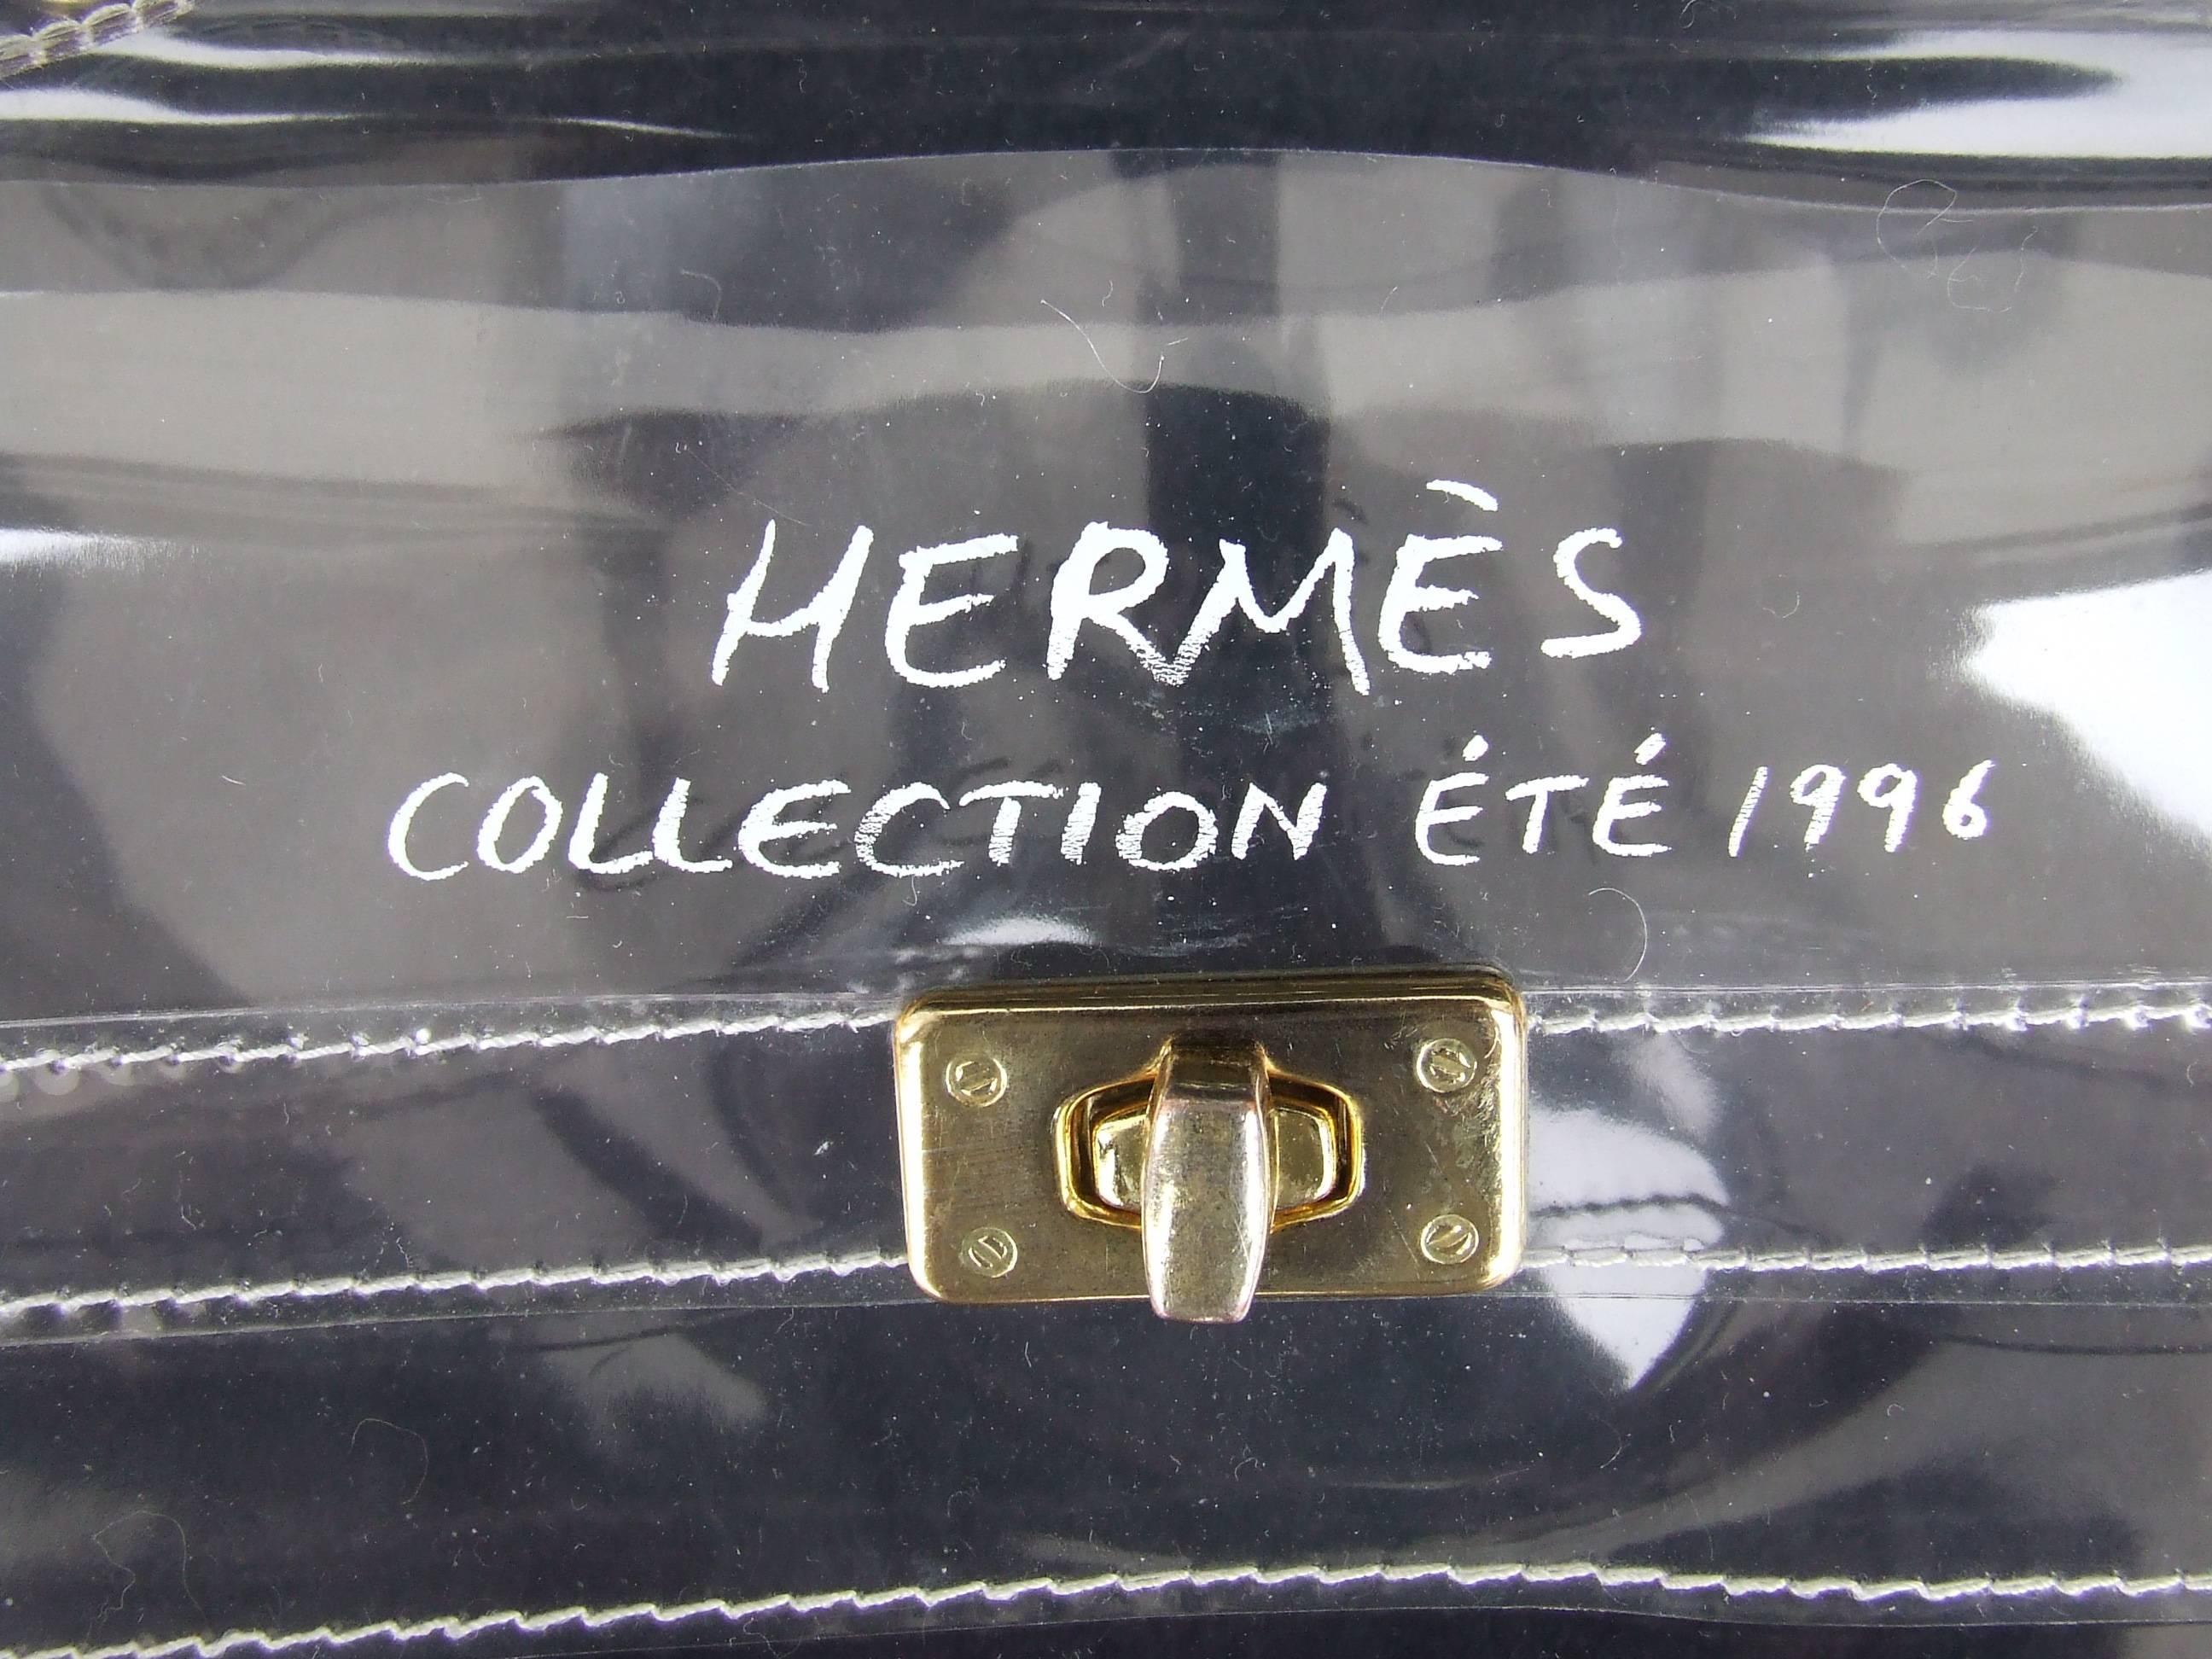 RARE and Collectible Authentic HERMES Bag

